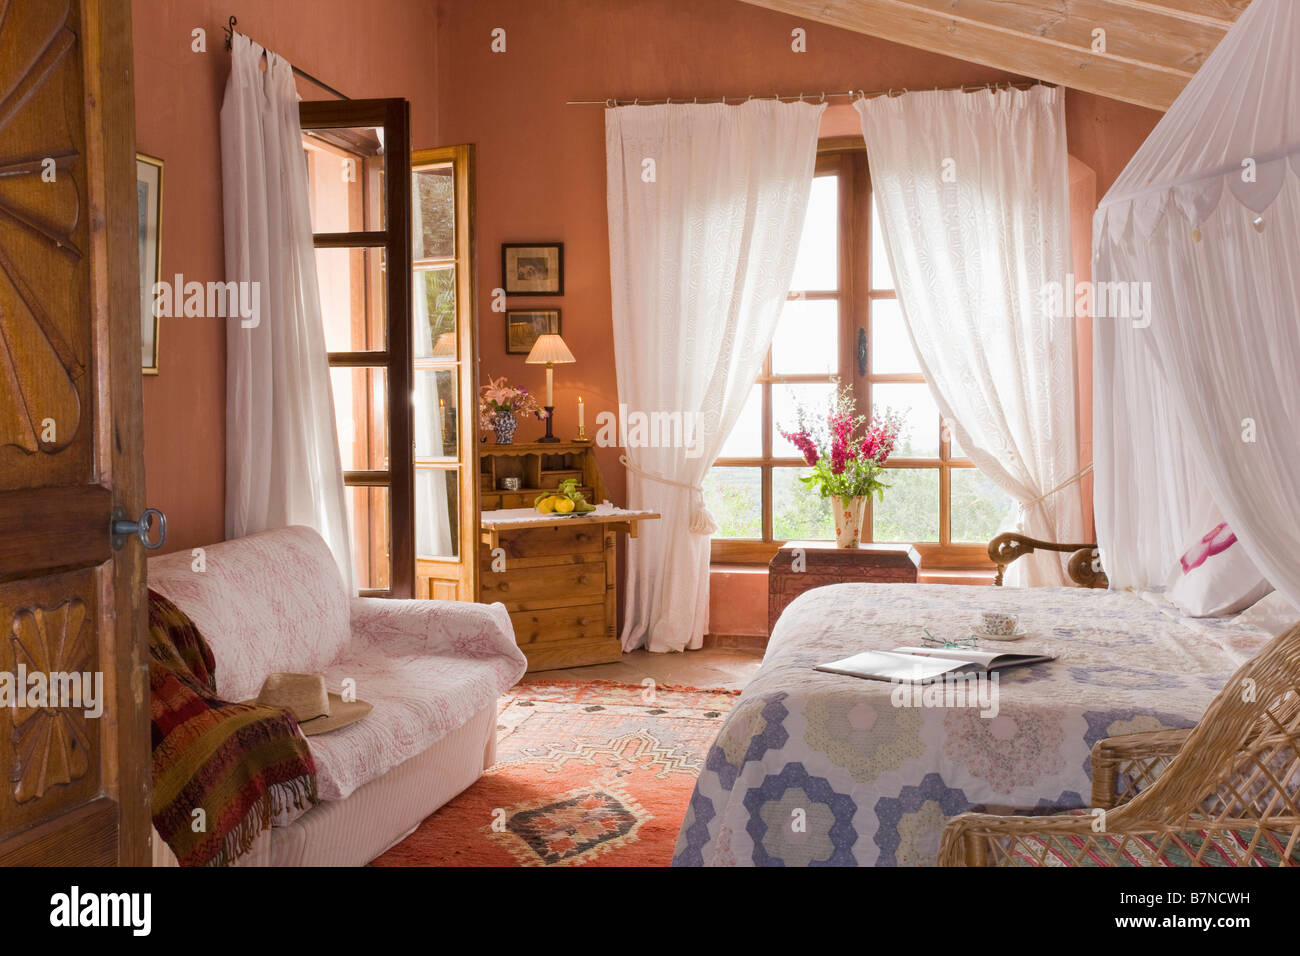 White Mosquito Net Above Bed With Patchwork Quilt In Terracotta